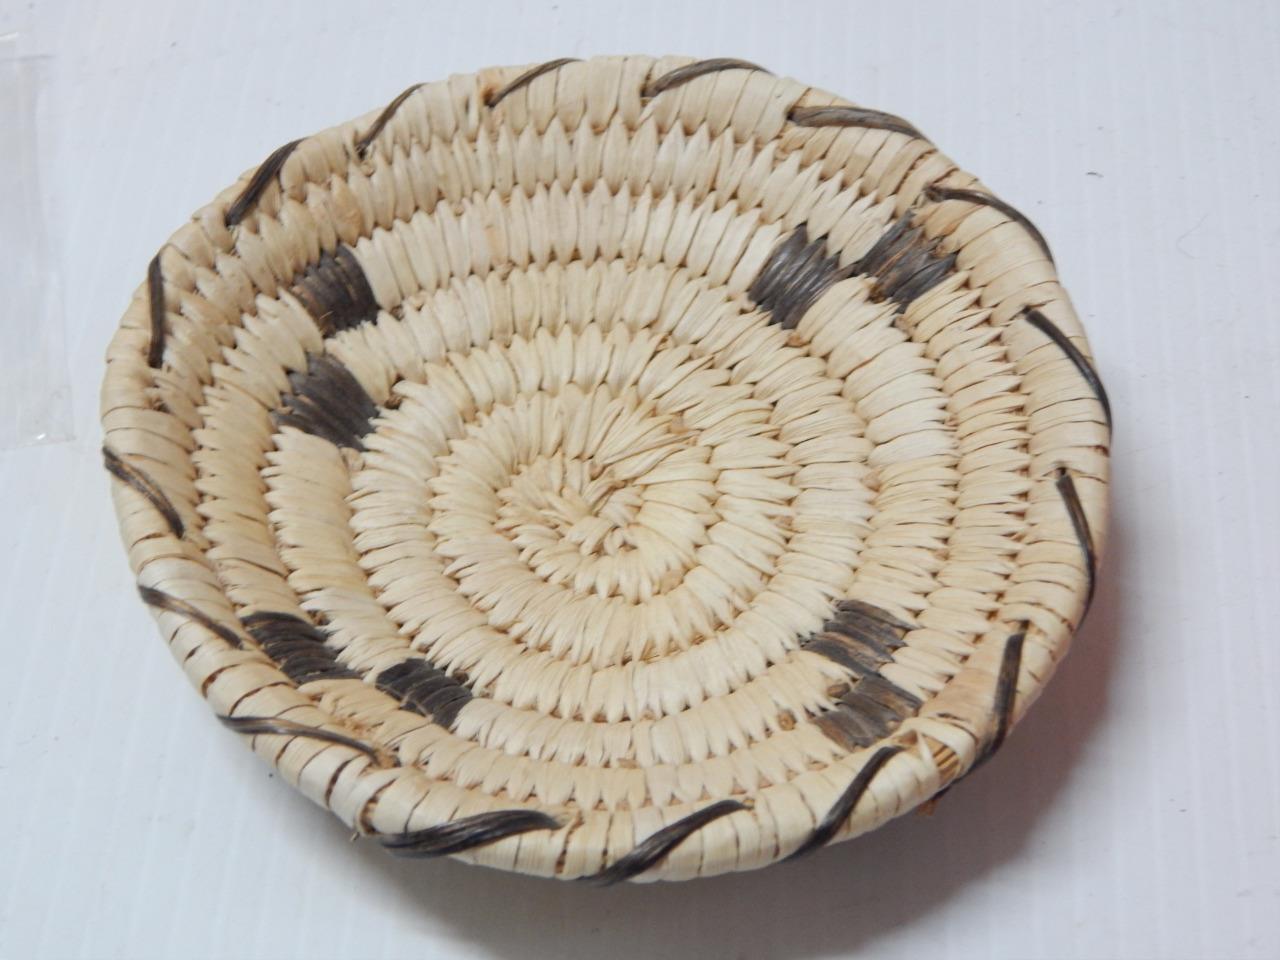 VINTAGE PAPAGO INDIAN SMALL / MINIATURE SIZED BASKET / TRAY - CLEAN + PRISTINE